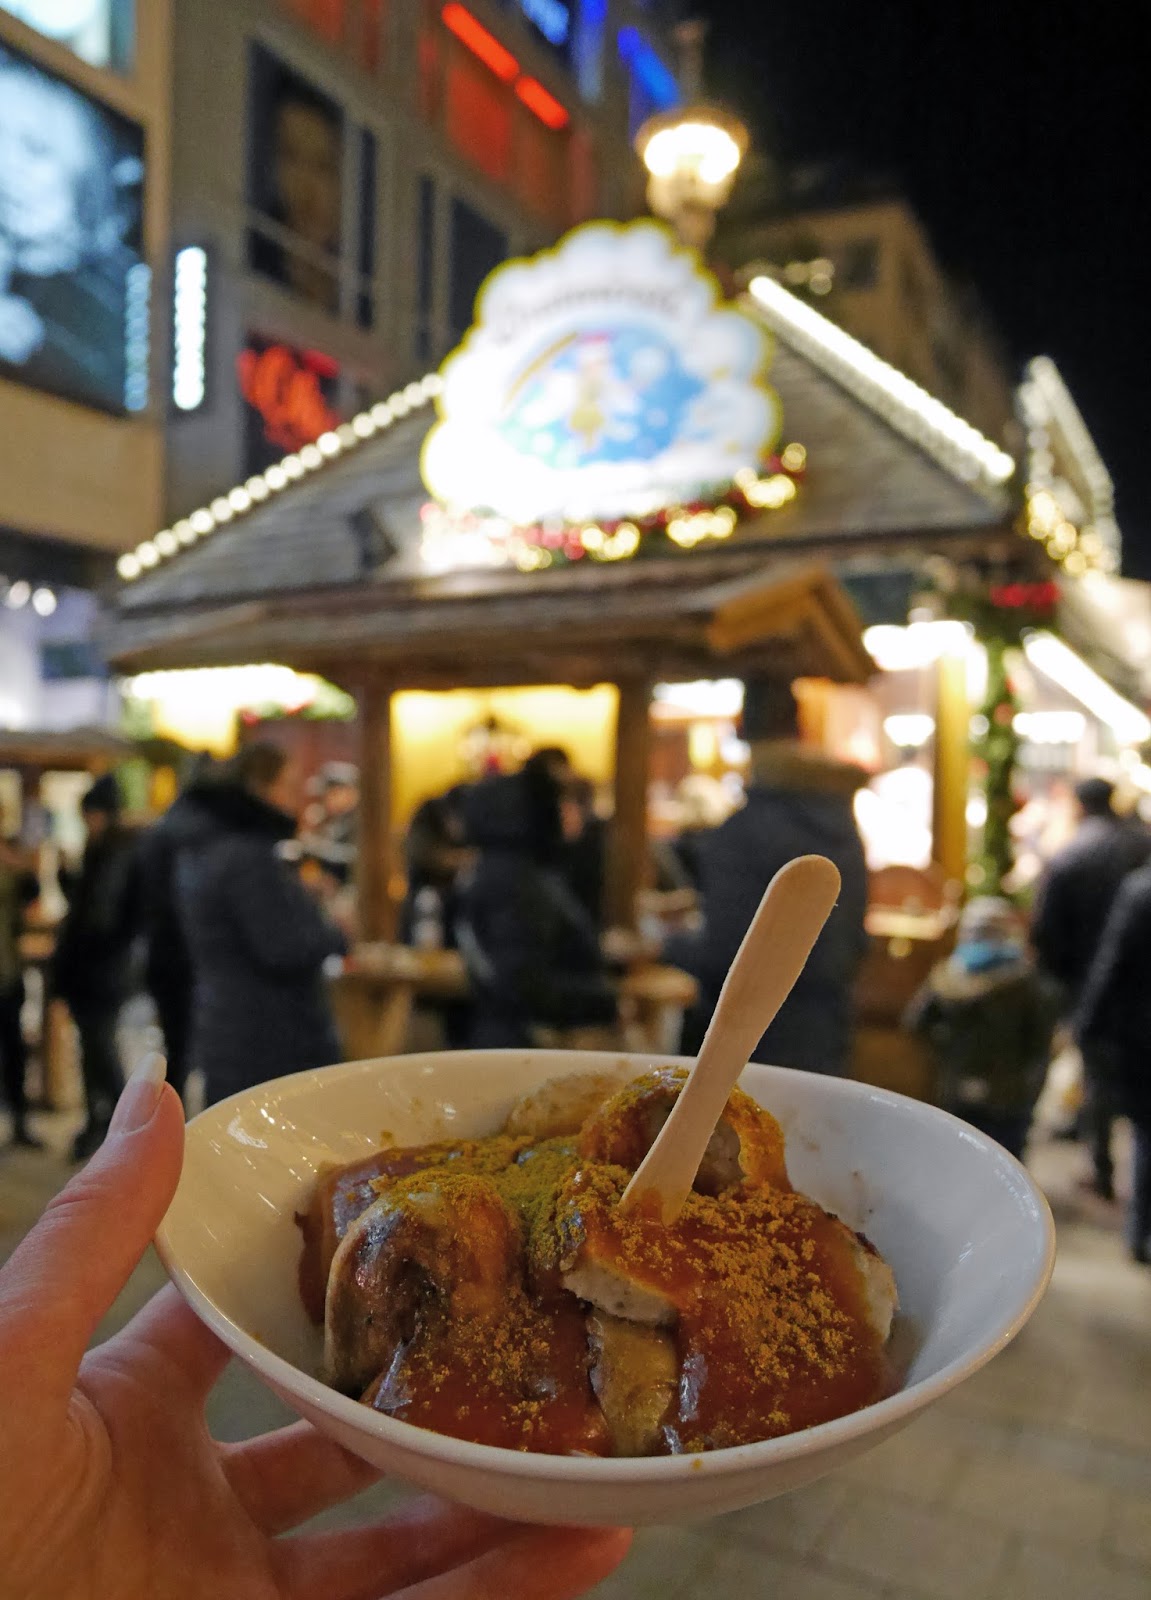 Trying currywurst at the Munich Christmas Markets